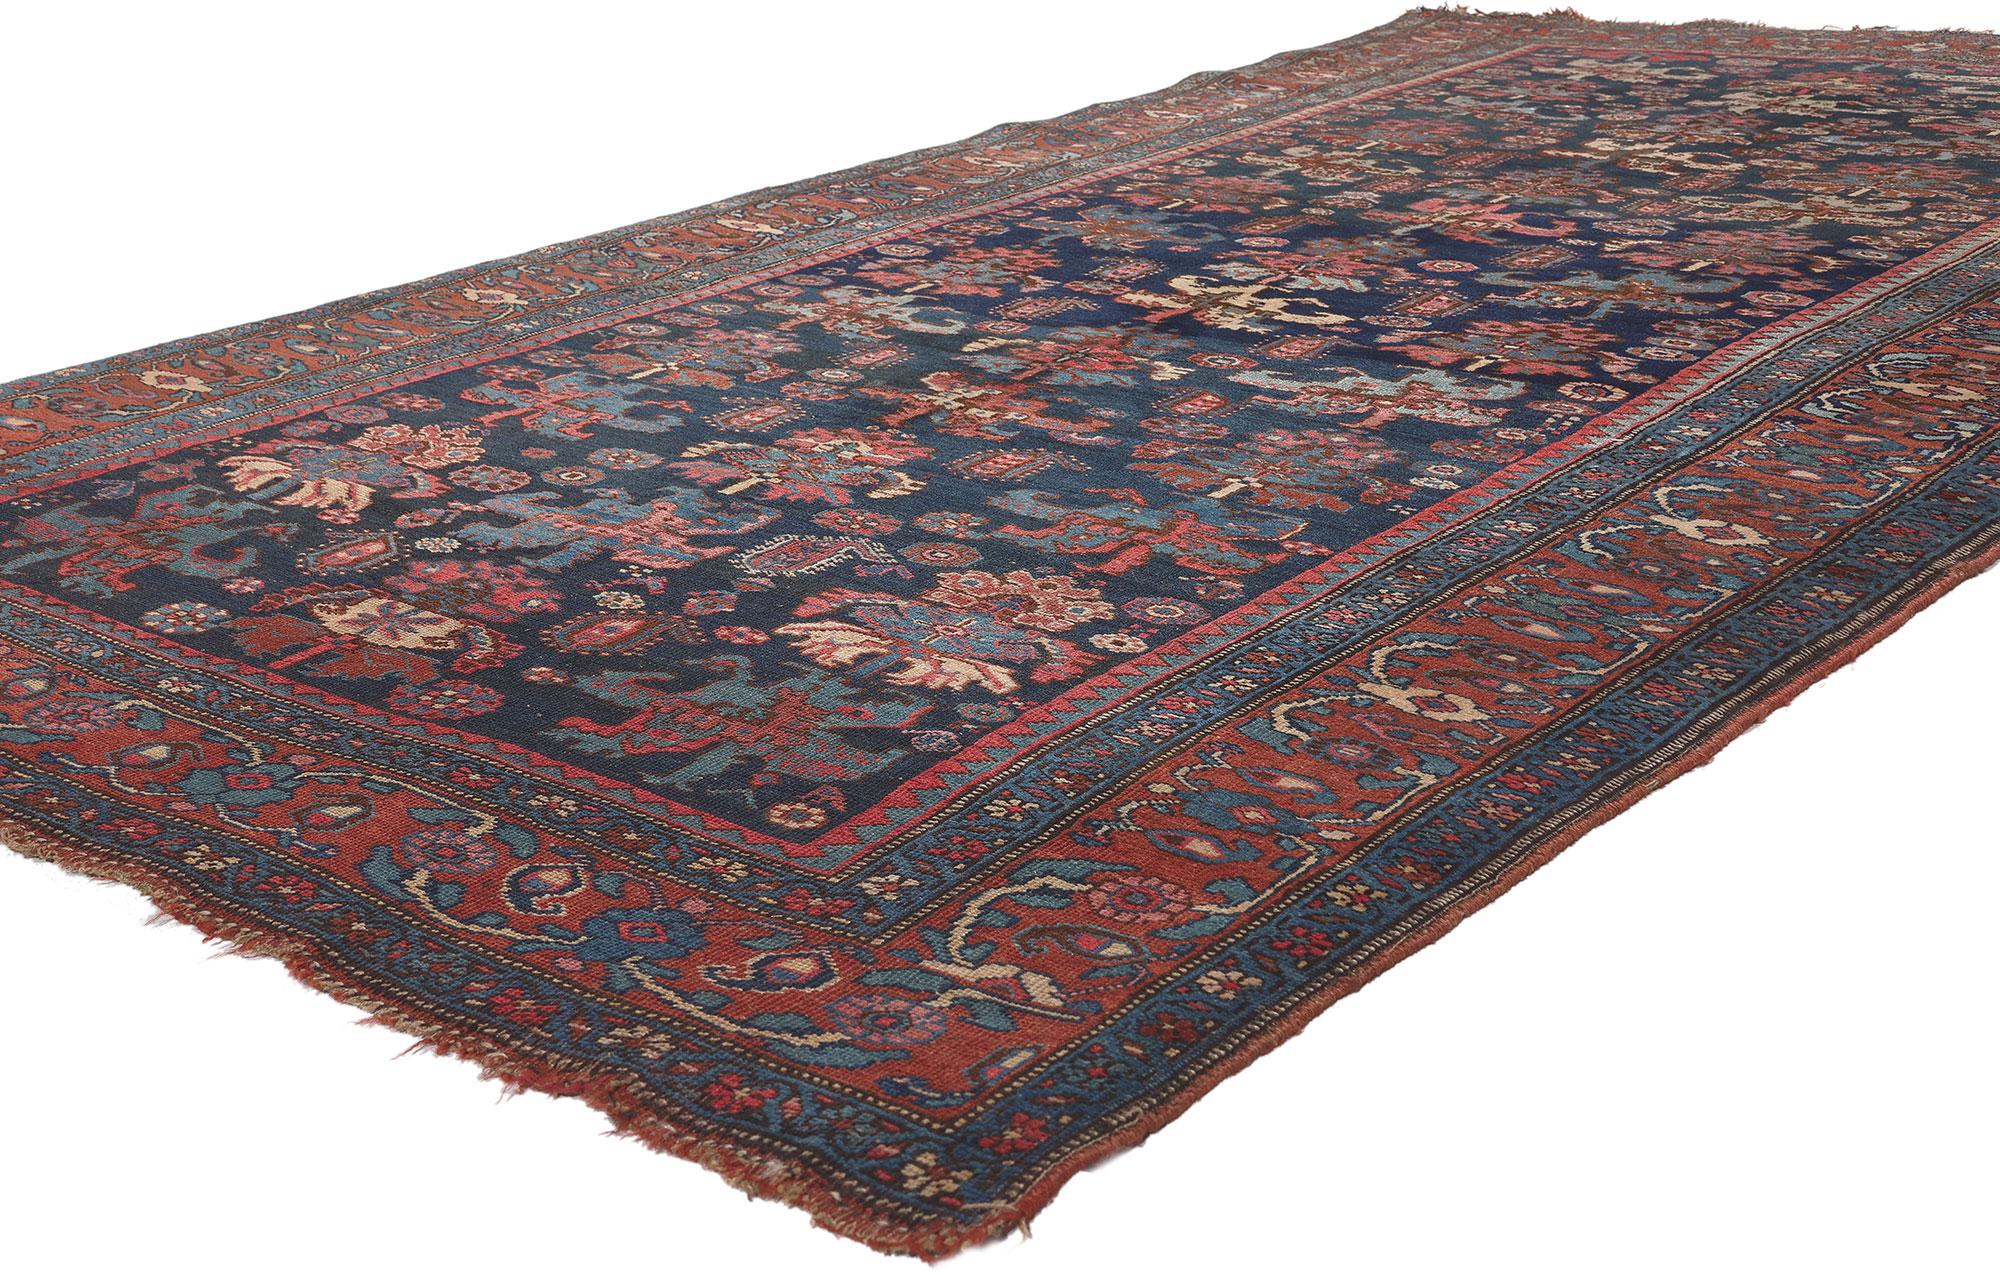 76771 Antique Persian Bijar Rug, 05'03 x 09'07.
Timelessly classic meets decidedly dapper in this antique Persian Bijar rug. The geometric masculine design and moody hues woven into this piece work together creating a relaxed yet sophisticated